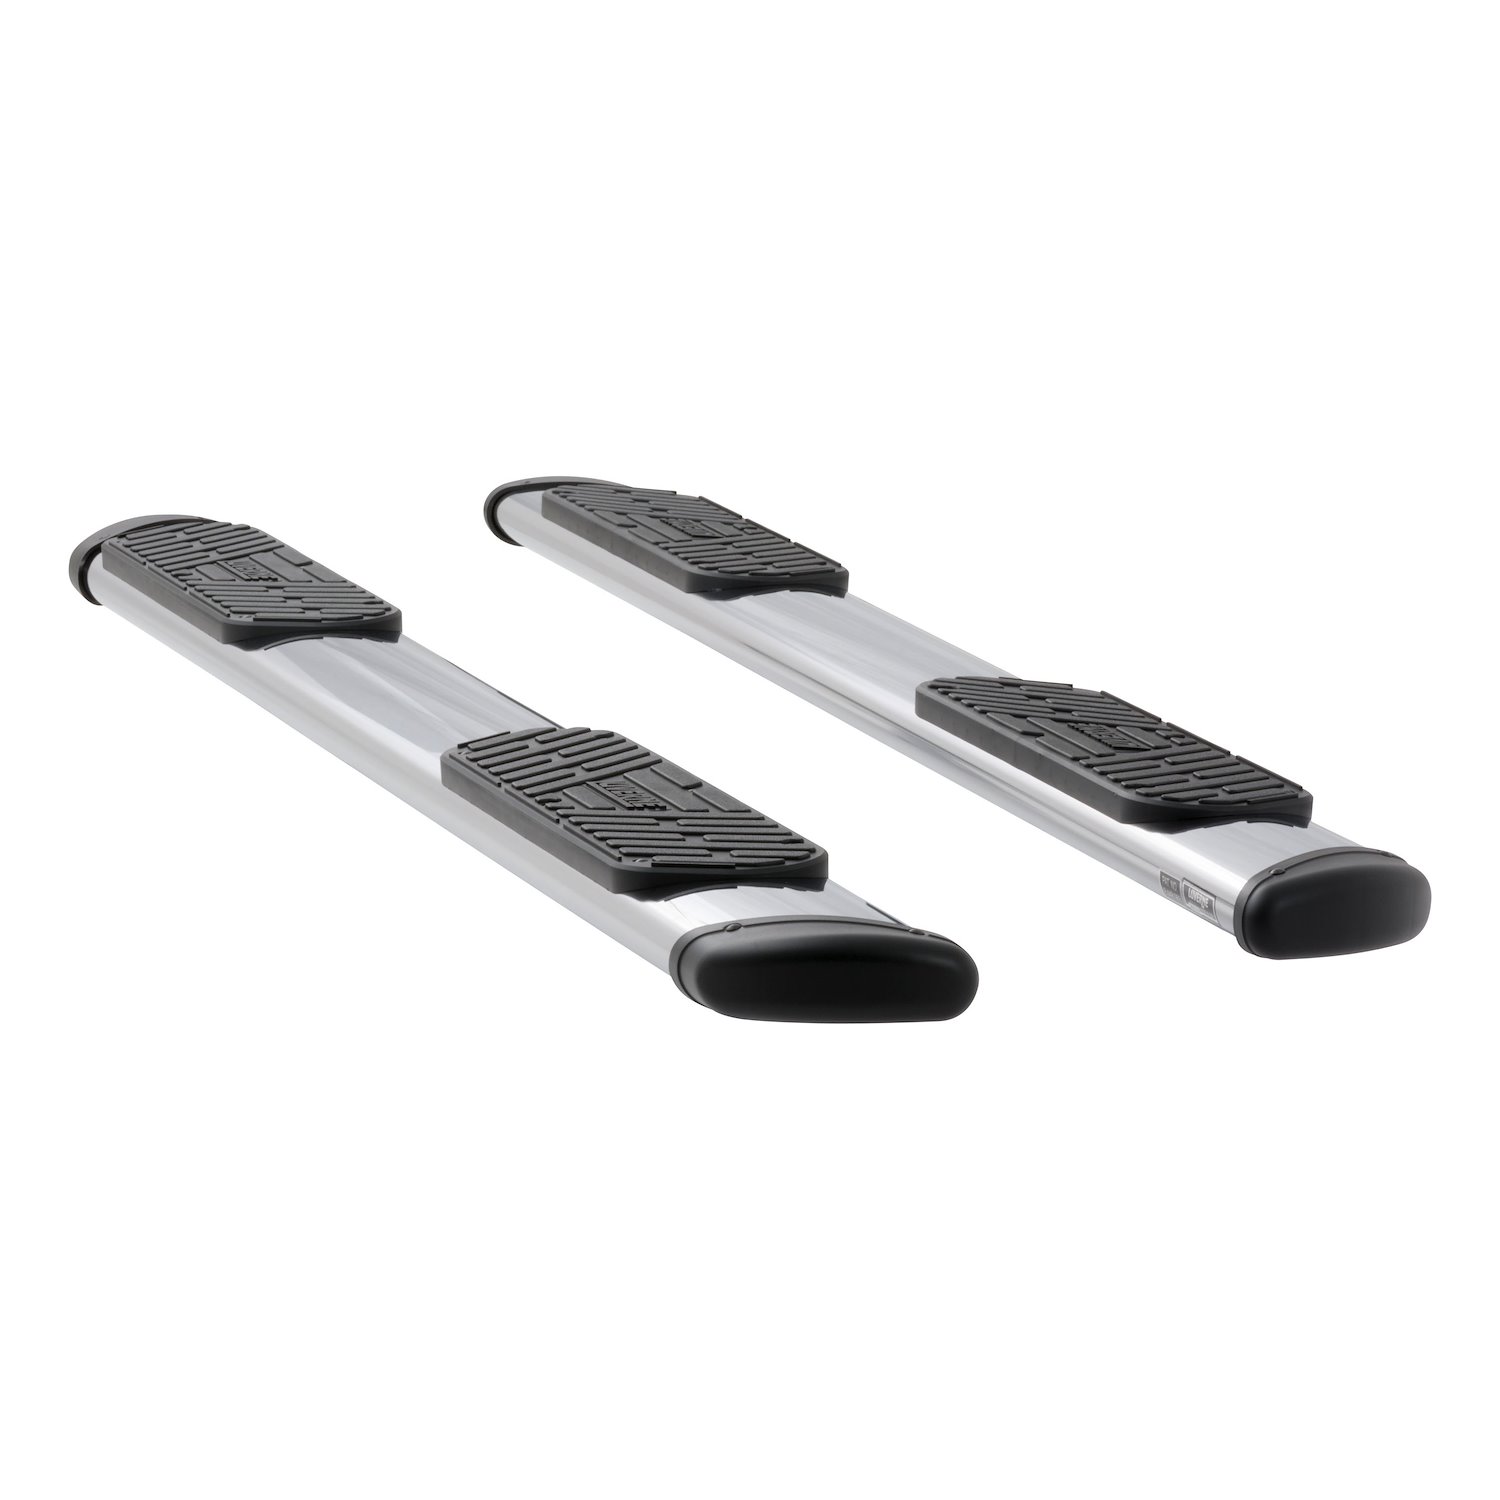 477093-400939 Regal 7 Polished Stainless 93 in. Oval W2W Steps Fits Select Dodge, Ram 1500